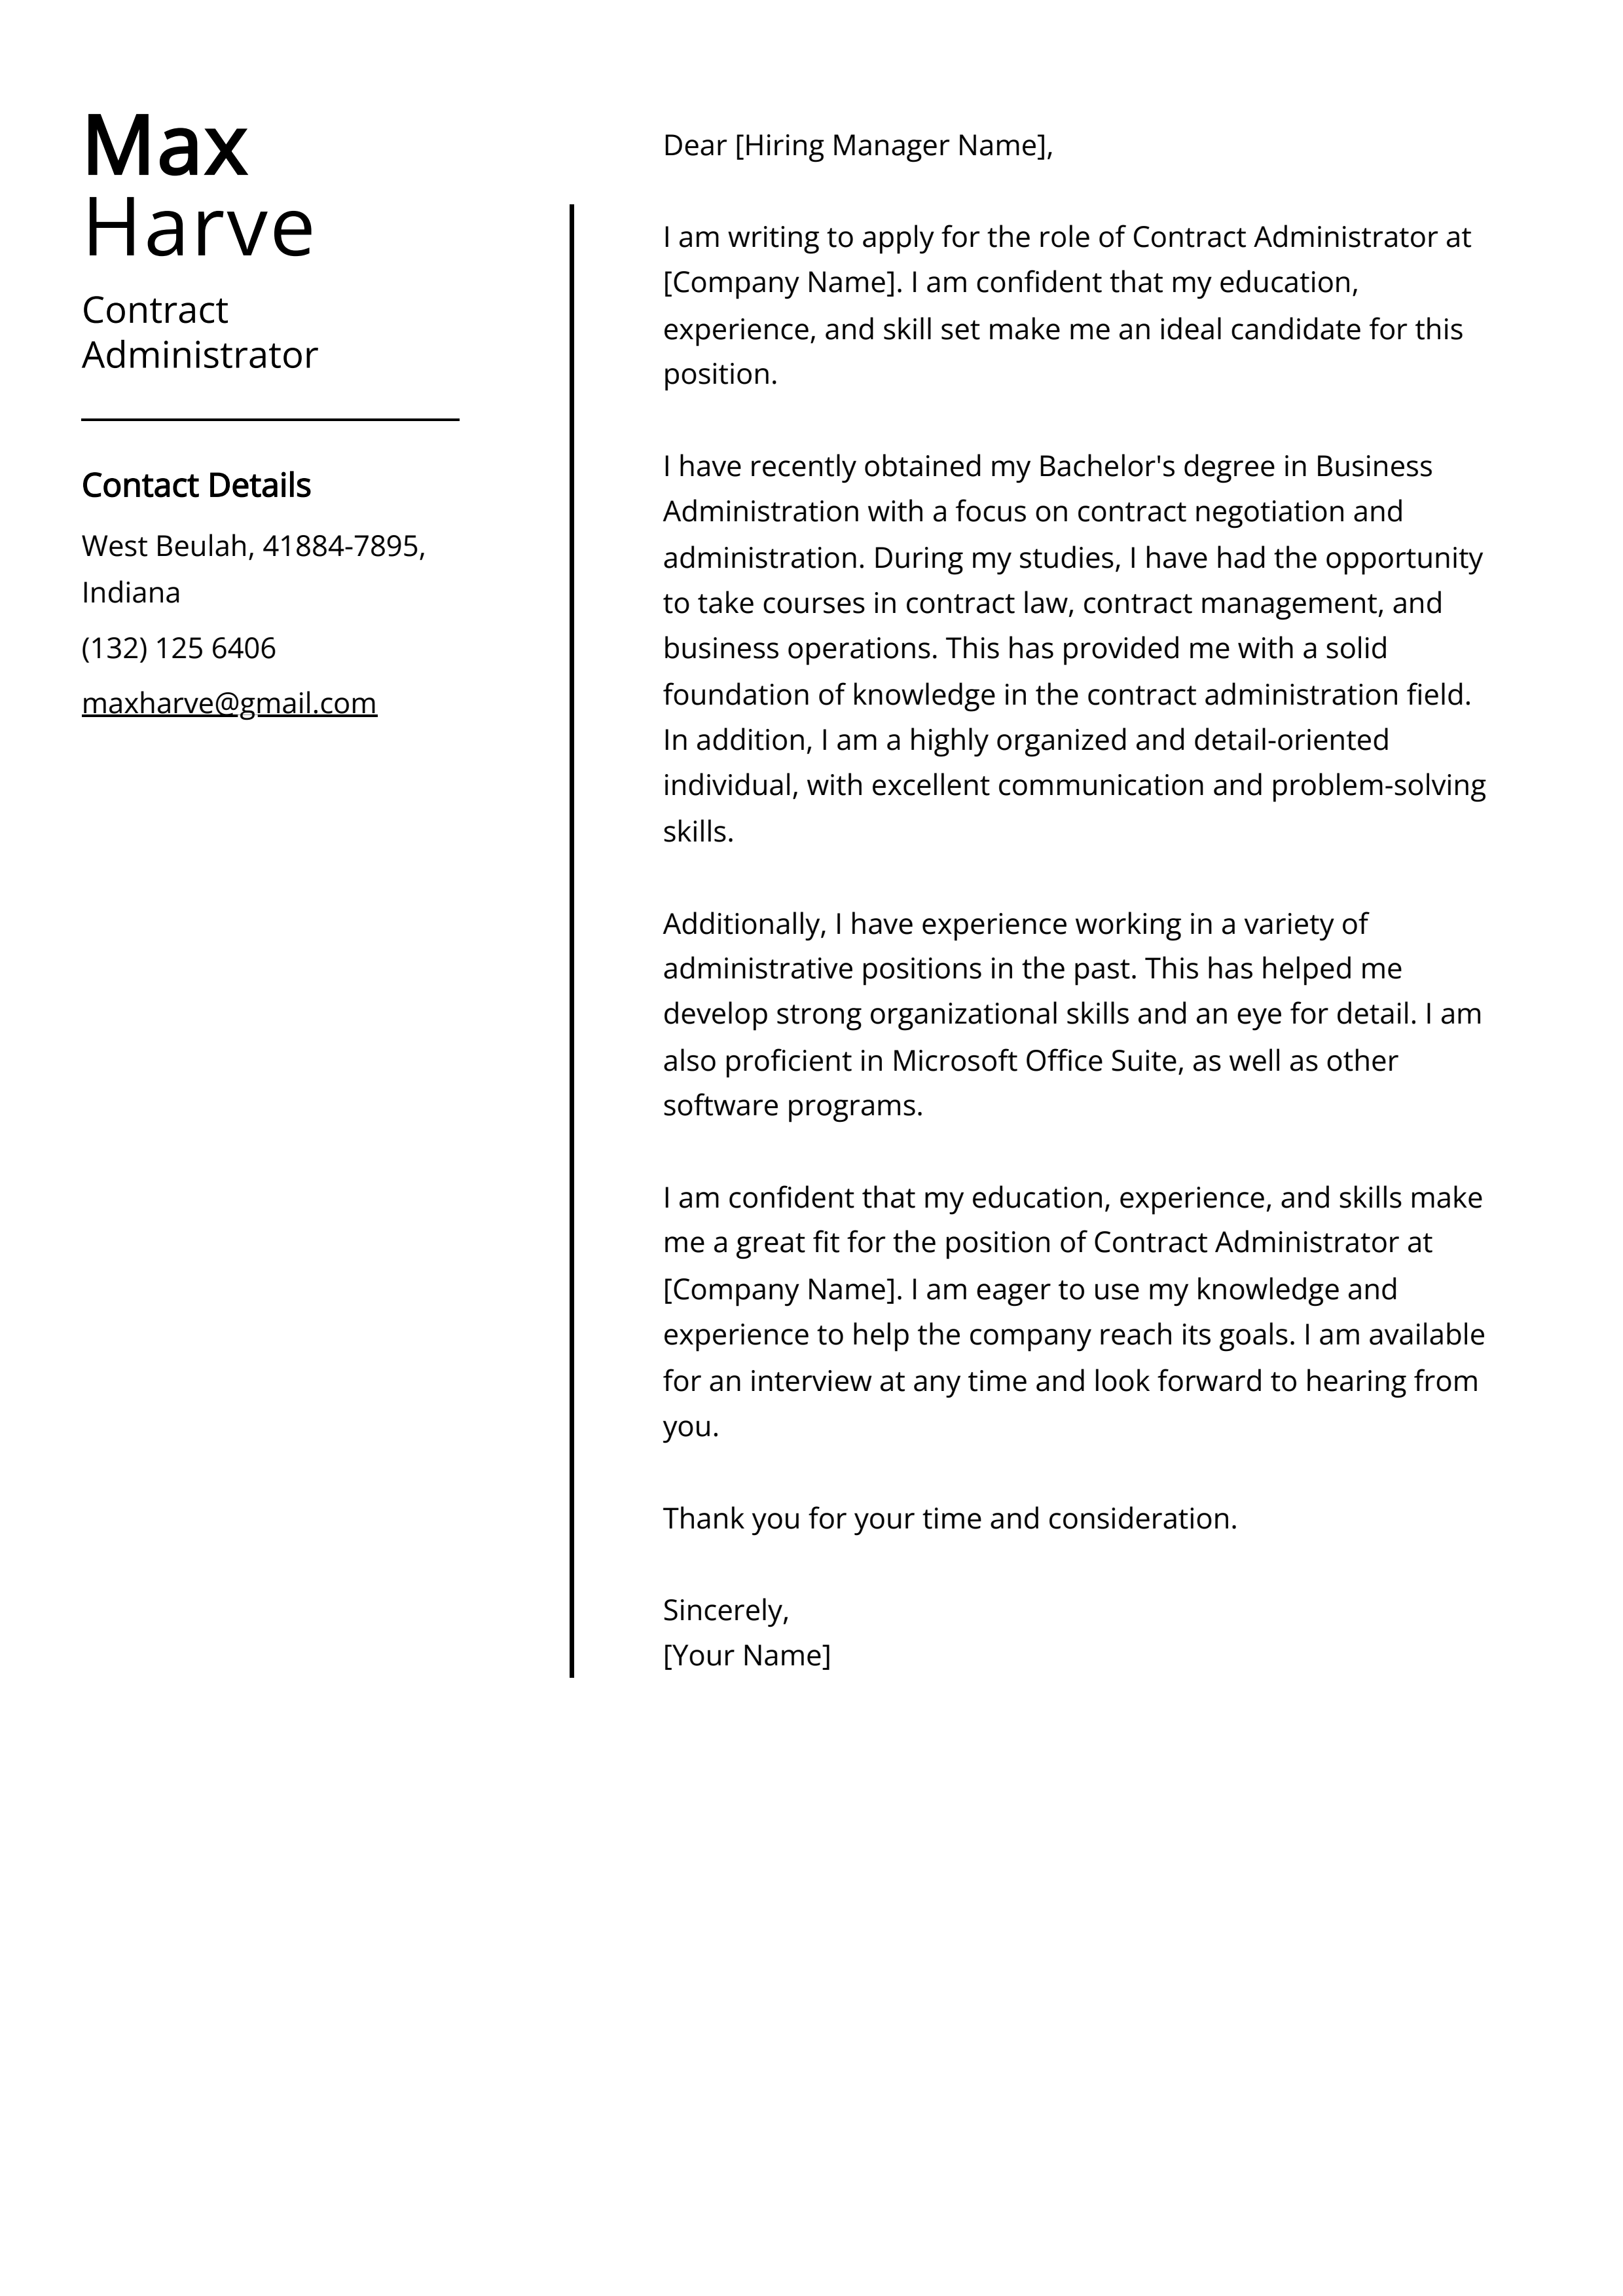 Contract Administrator Cover Letter Example